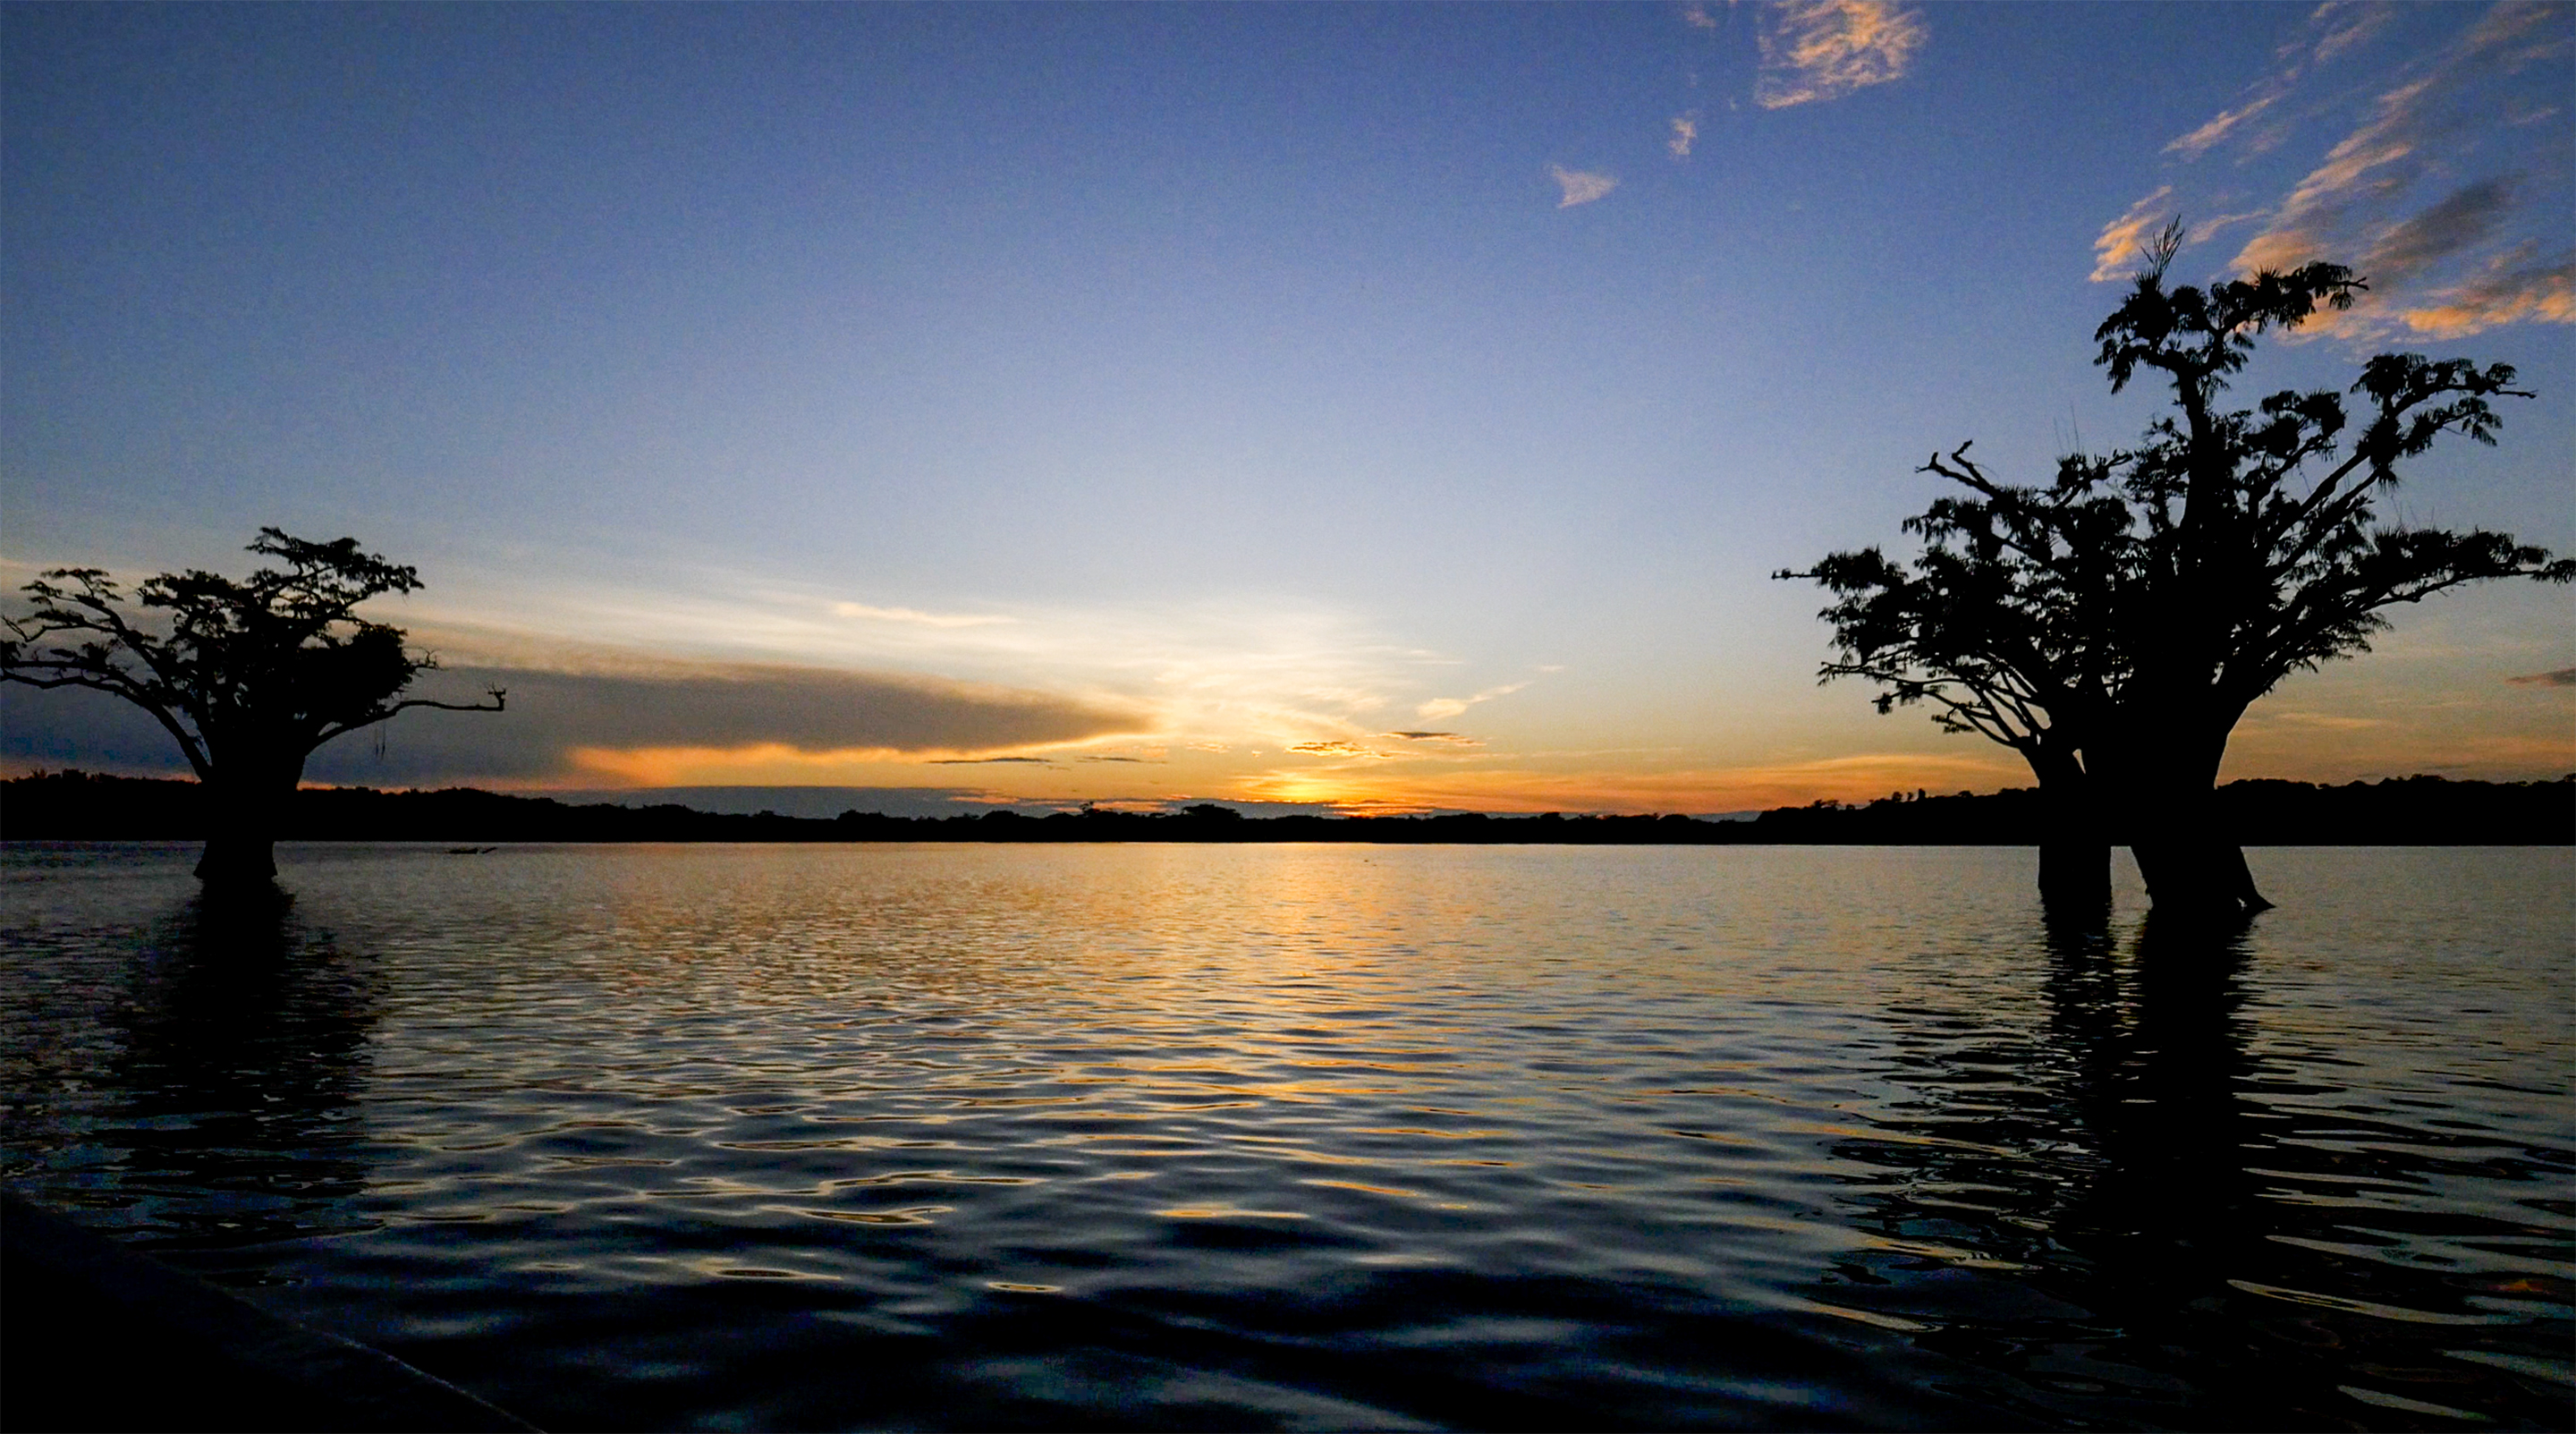 Reflecting on the sunset over la laguna grande in the Cuyabeno reserve. 